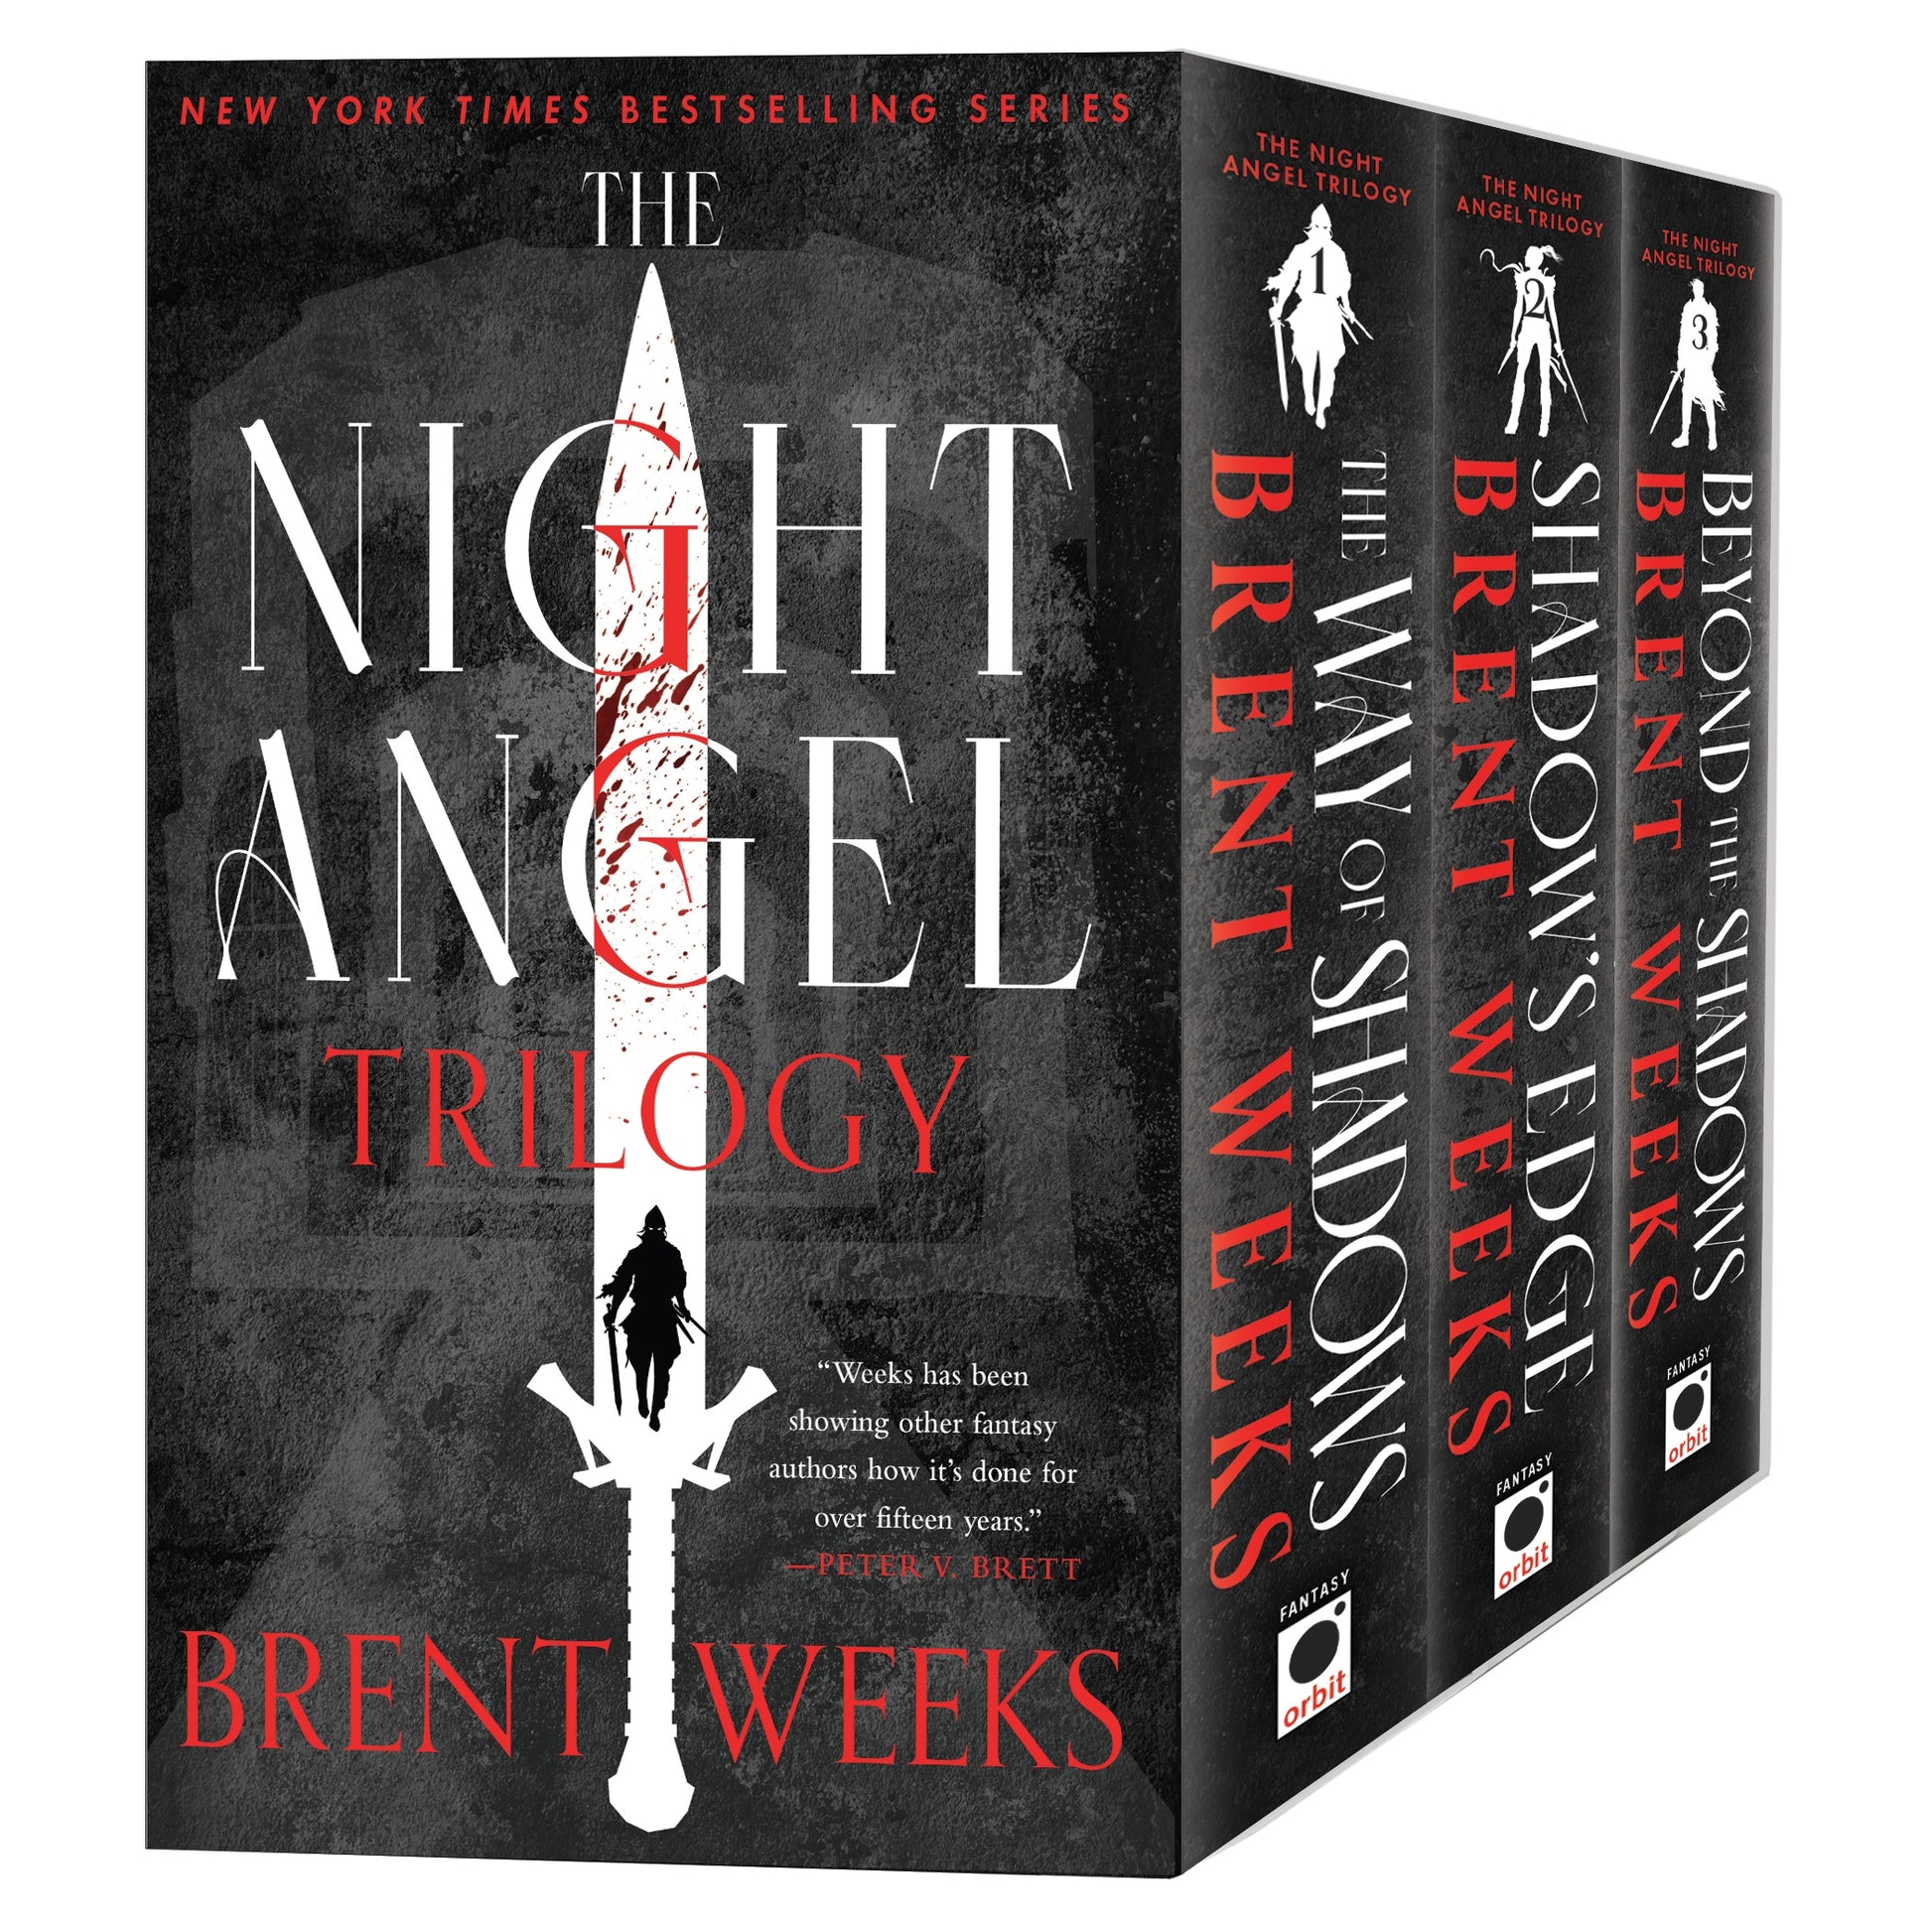 The Night Angel Trilogy Box Set by Brent Weeks